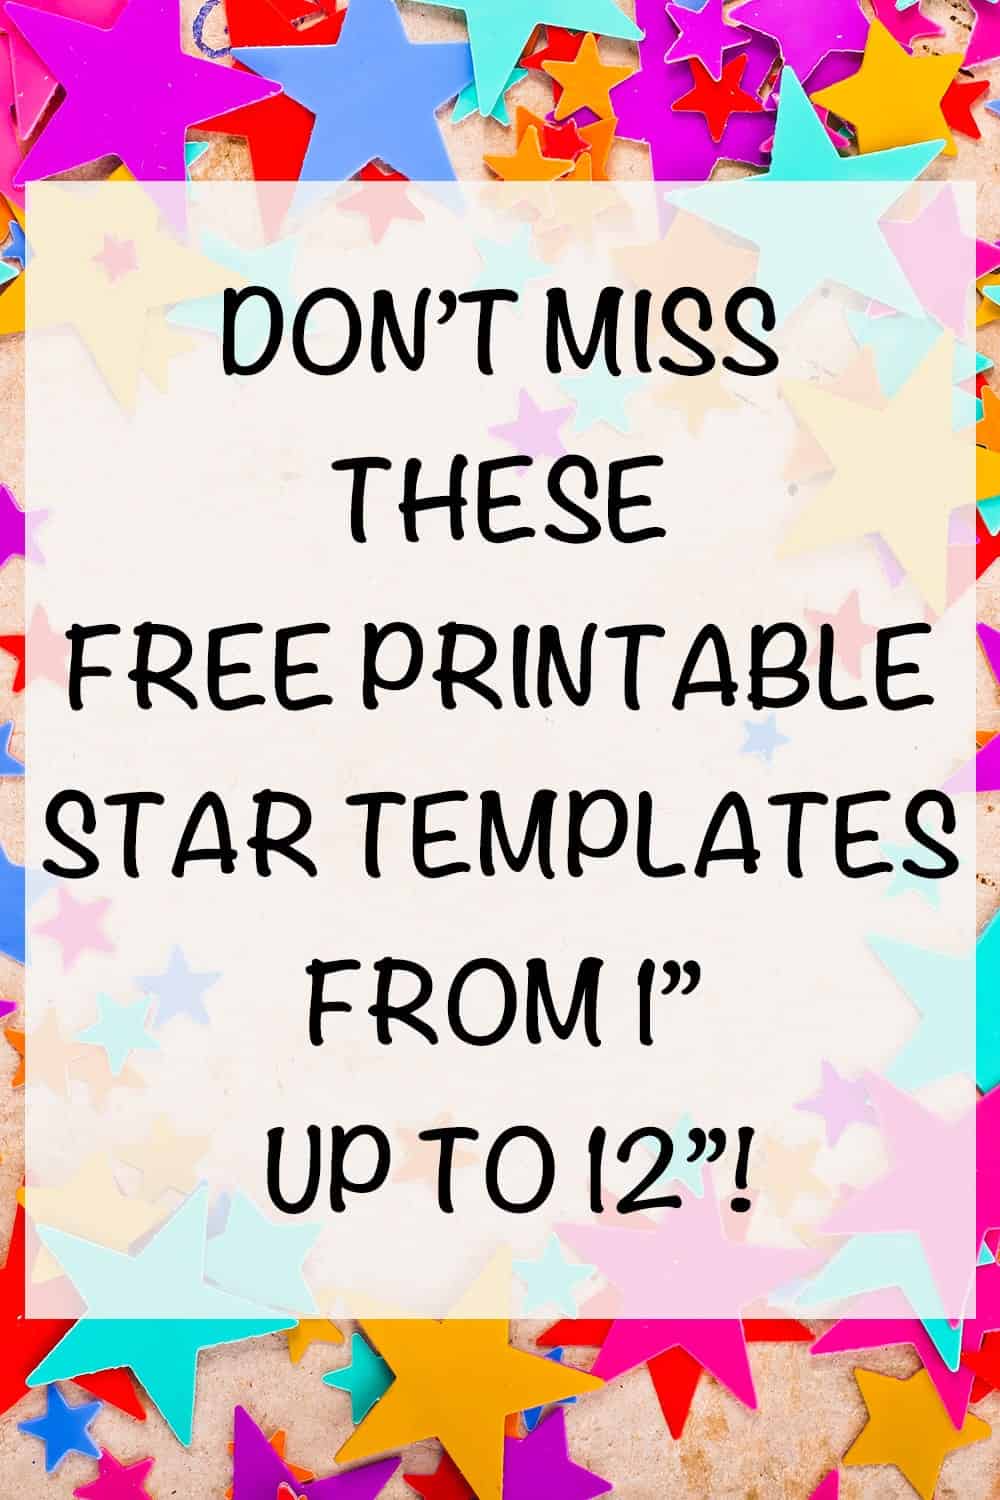 free printable star templates from 1" to 12"